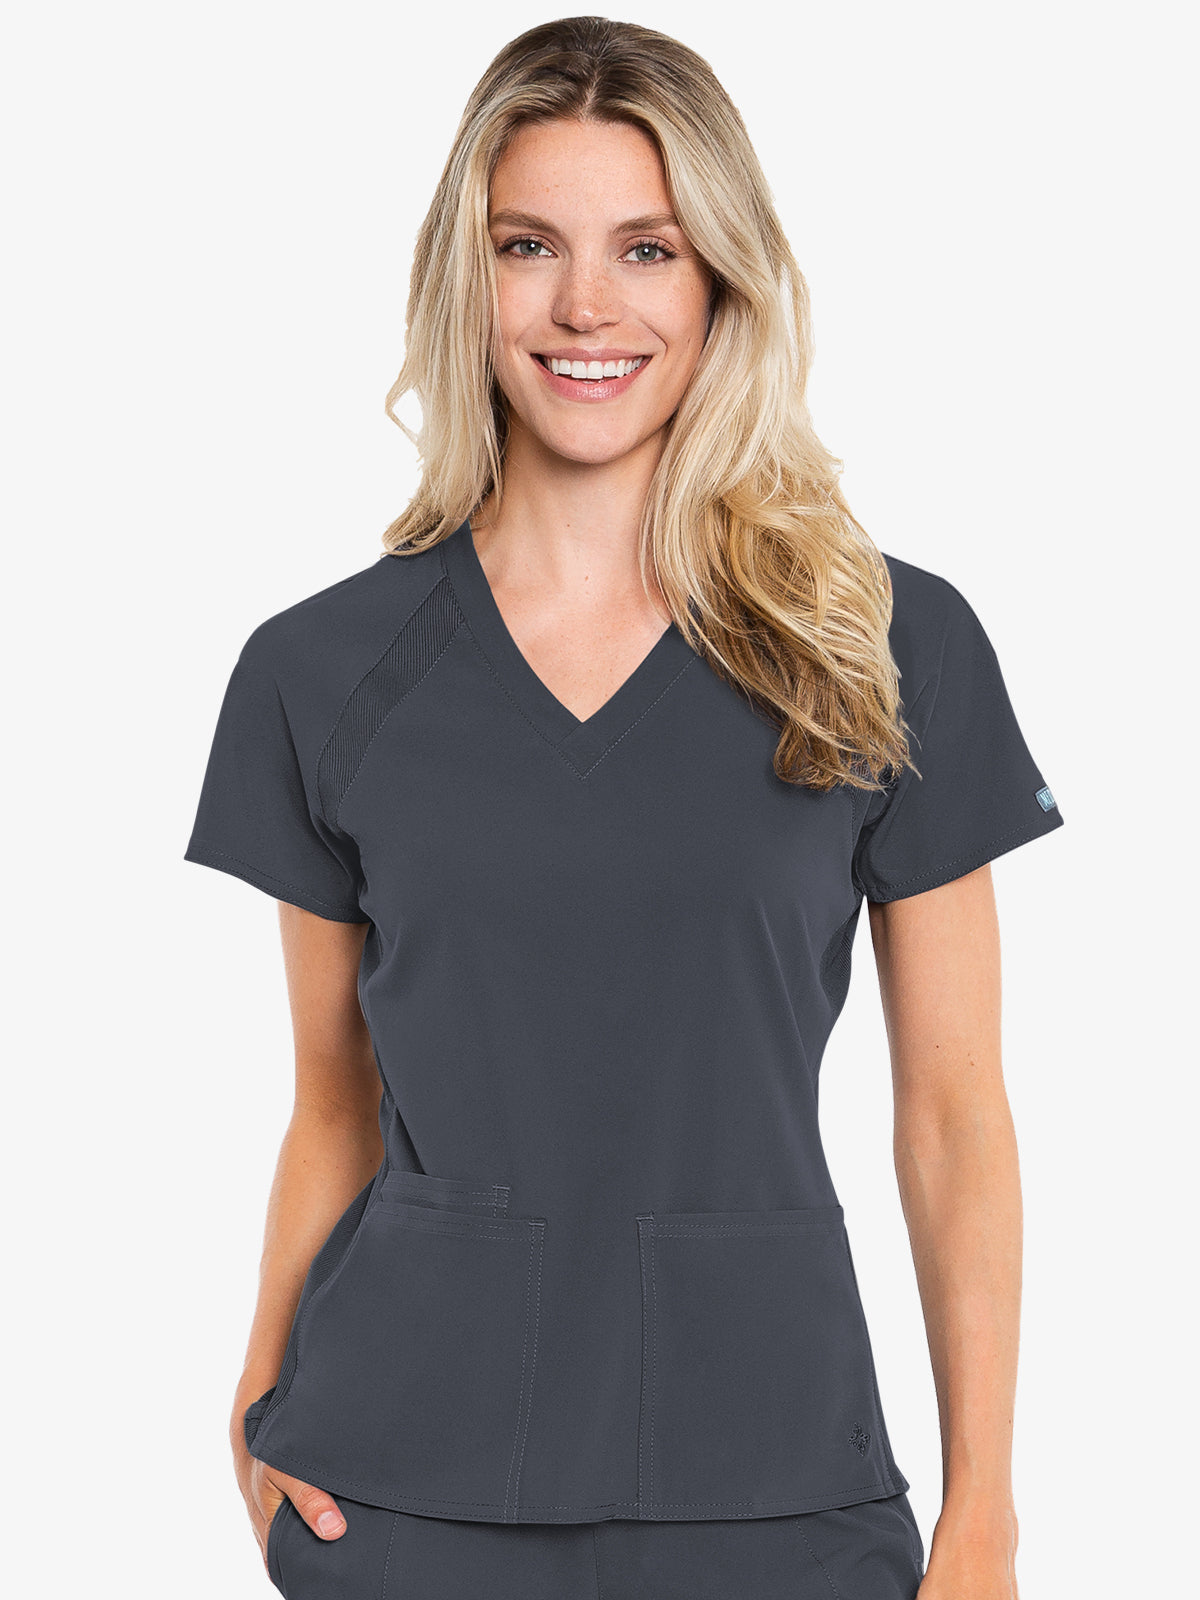 Med Couture Peaches 8470 Raglan 3 Pocket Top pewter